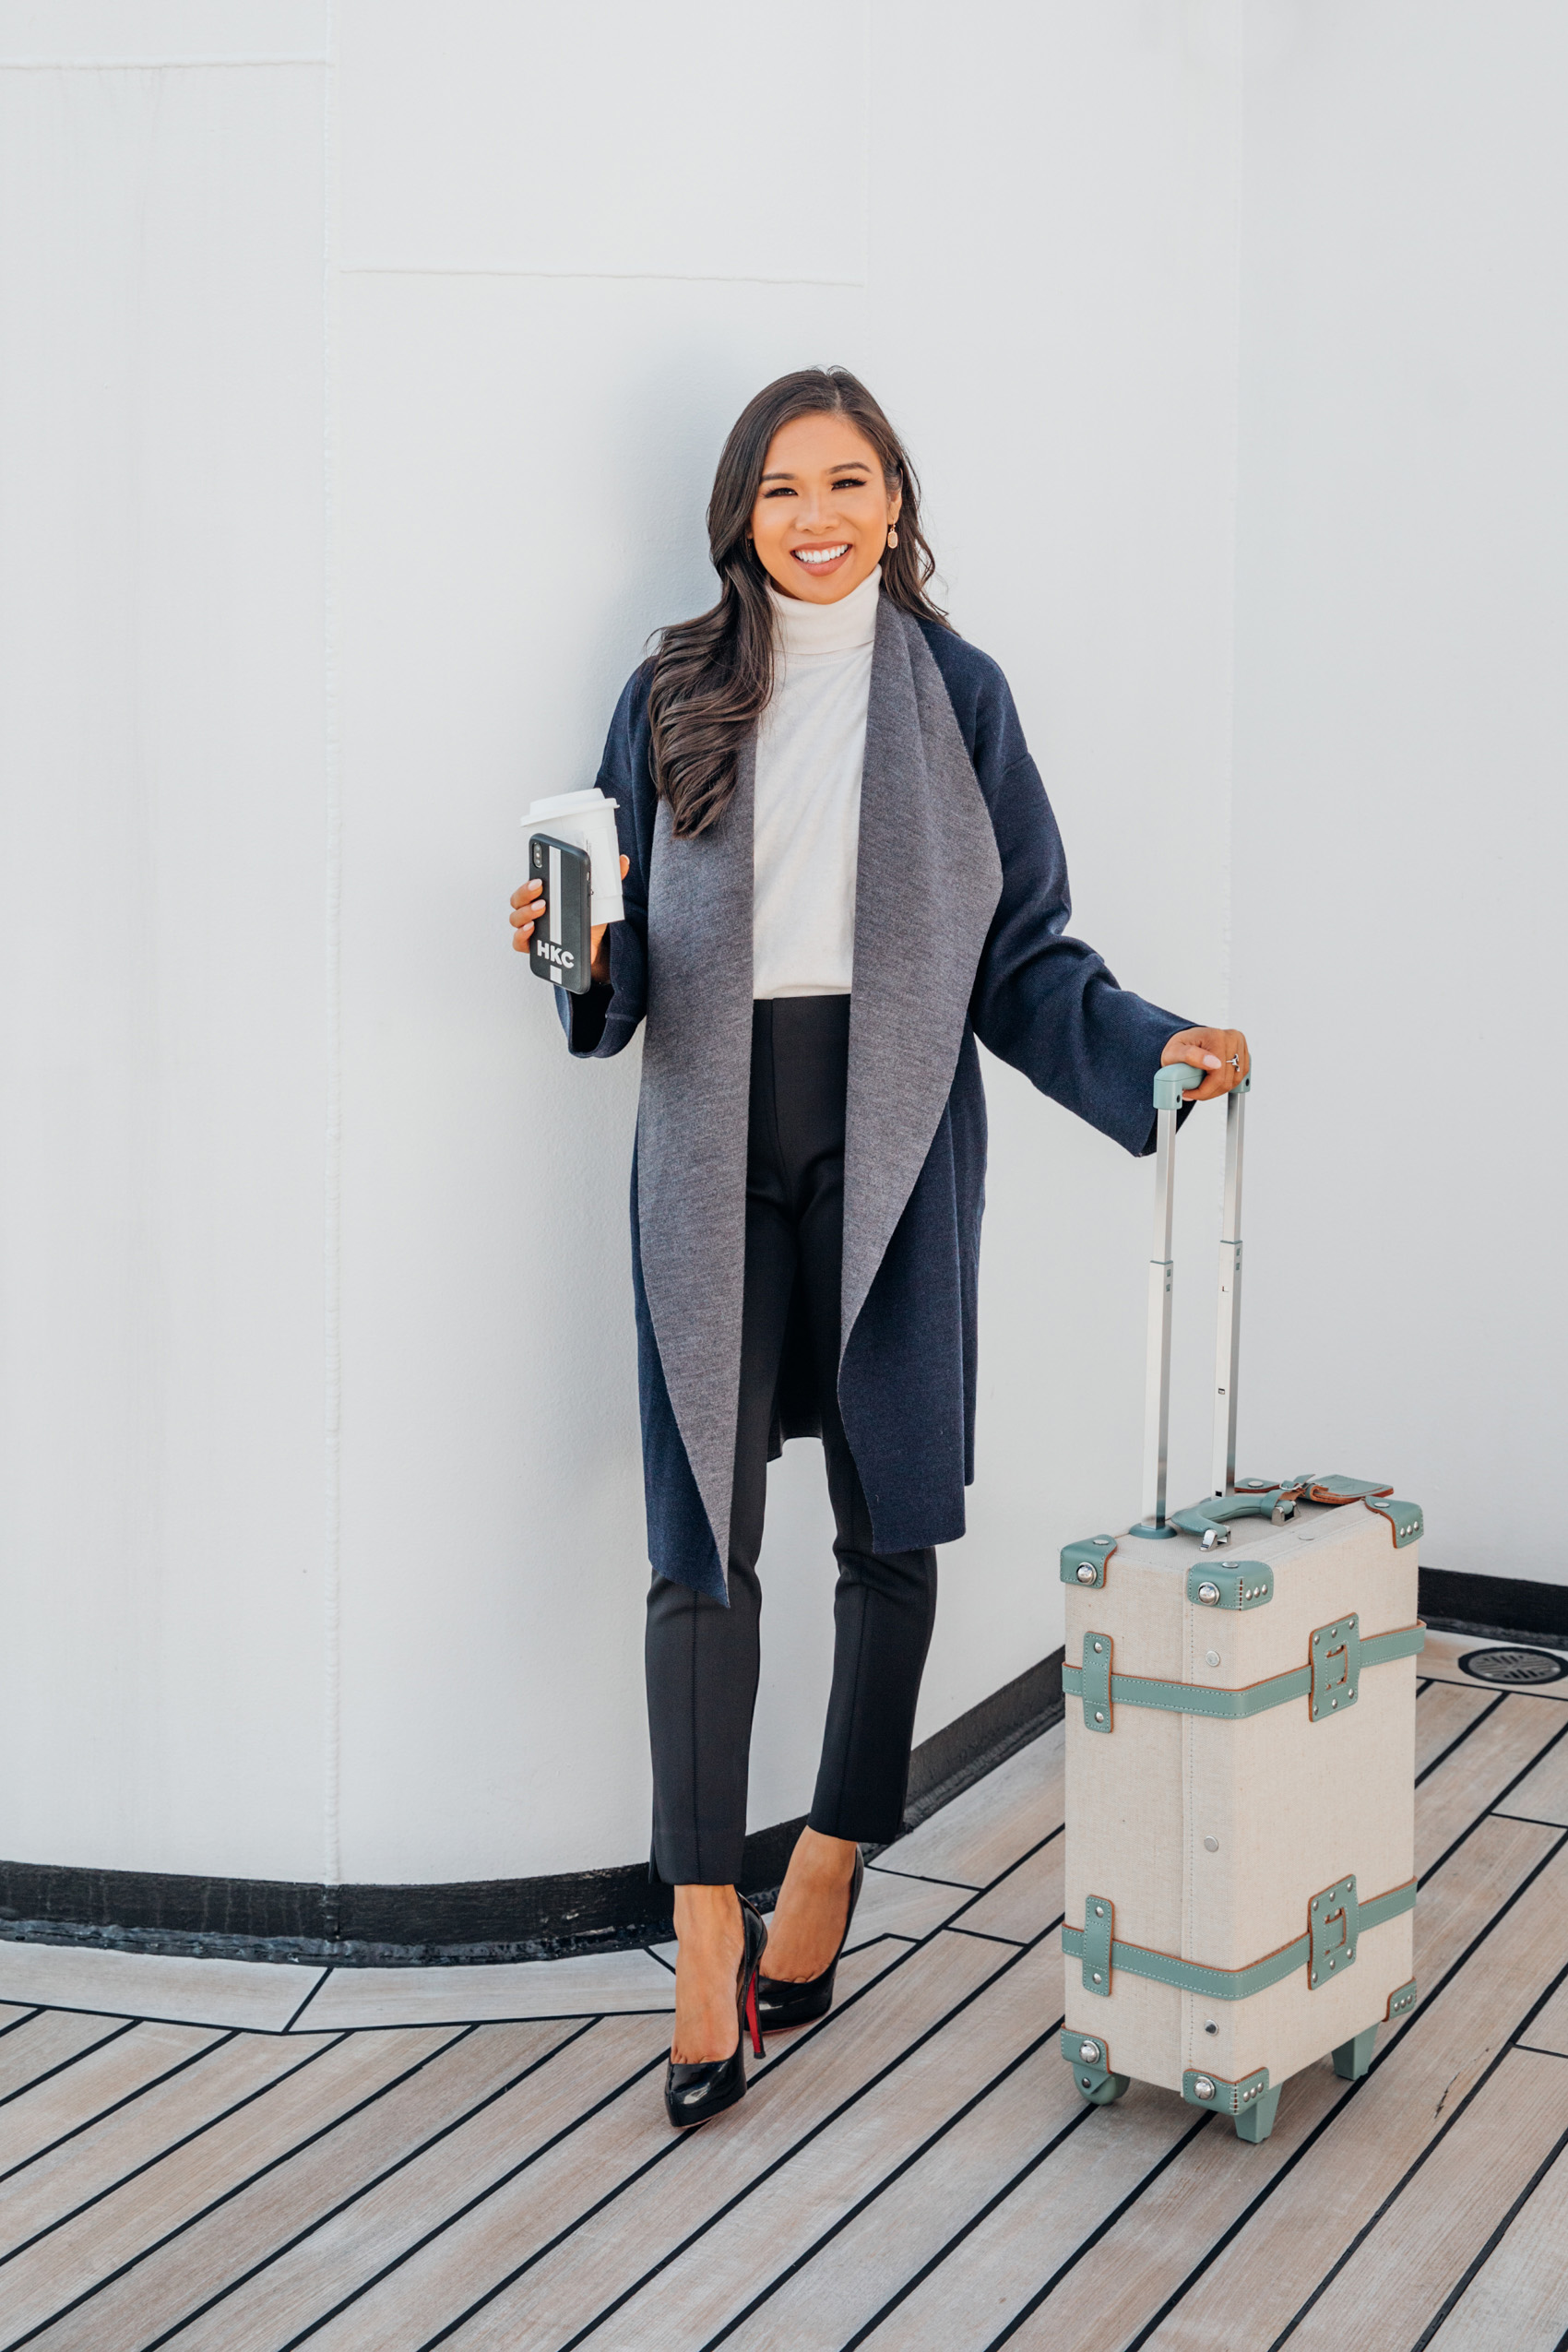 Blogger Hoang-Kim shares work travel outfits with a sleeveless turtleneck, merino wool coat and black pants